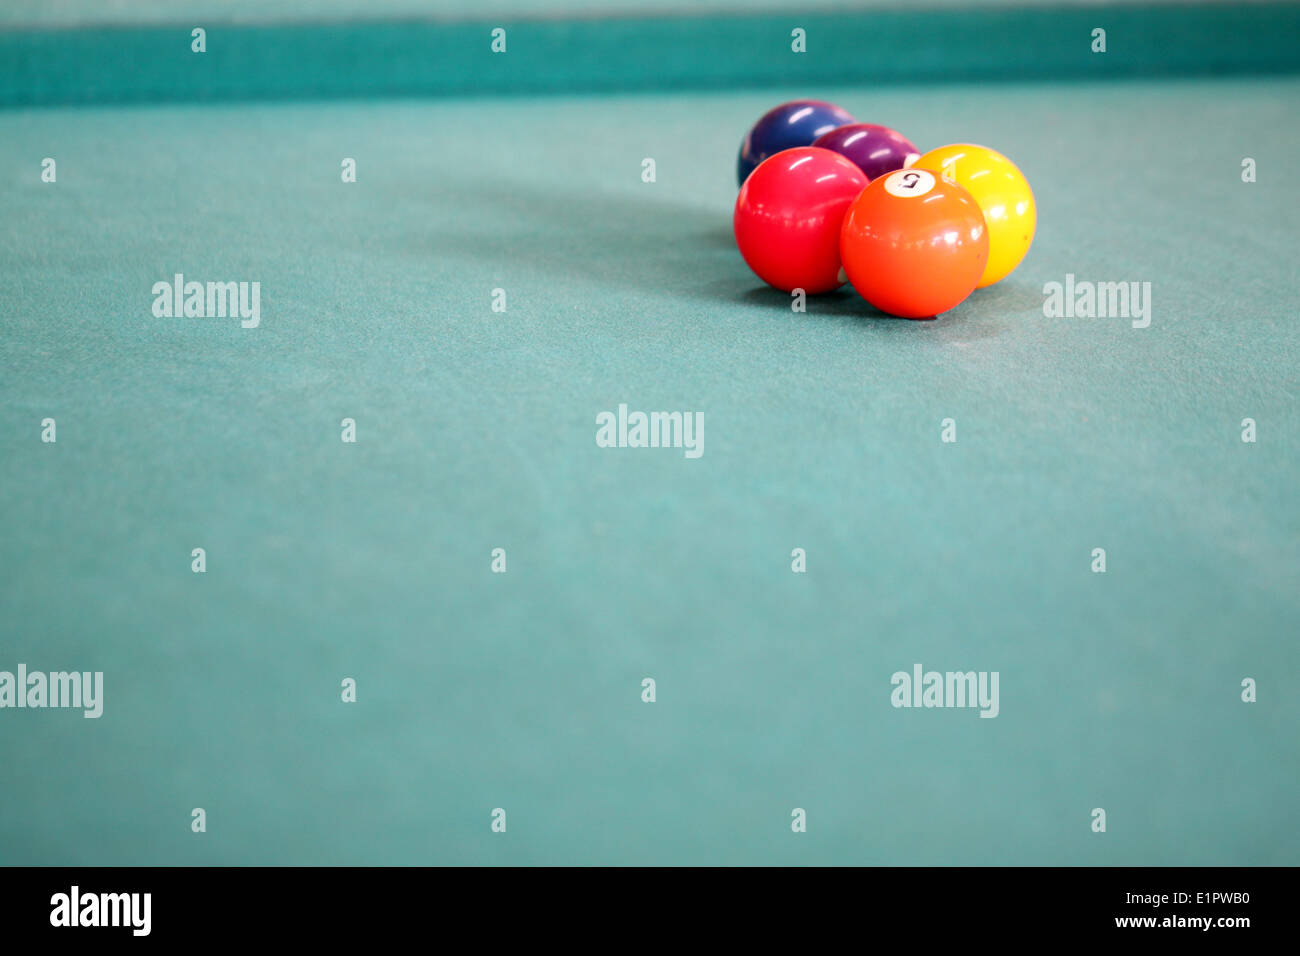 The color ball on the snooker table. Stock Photo